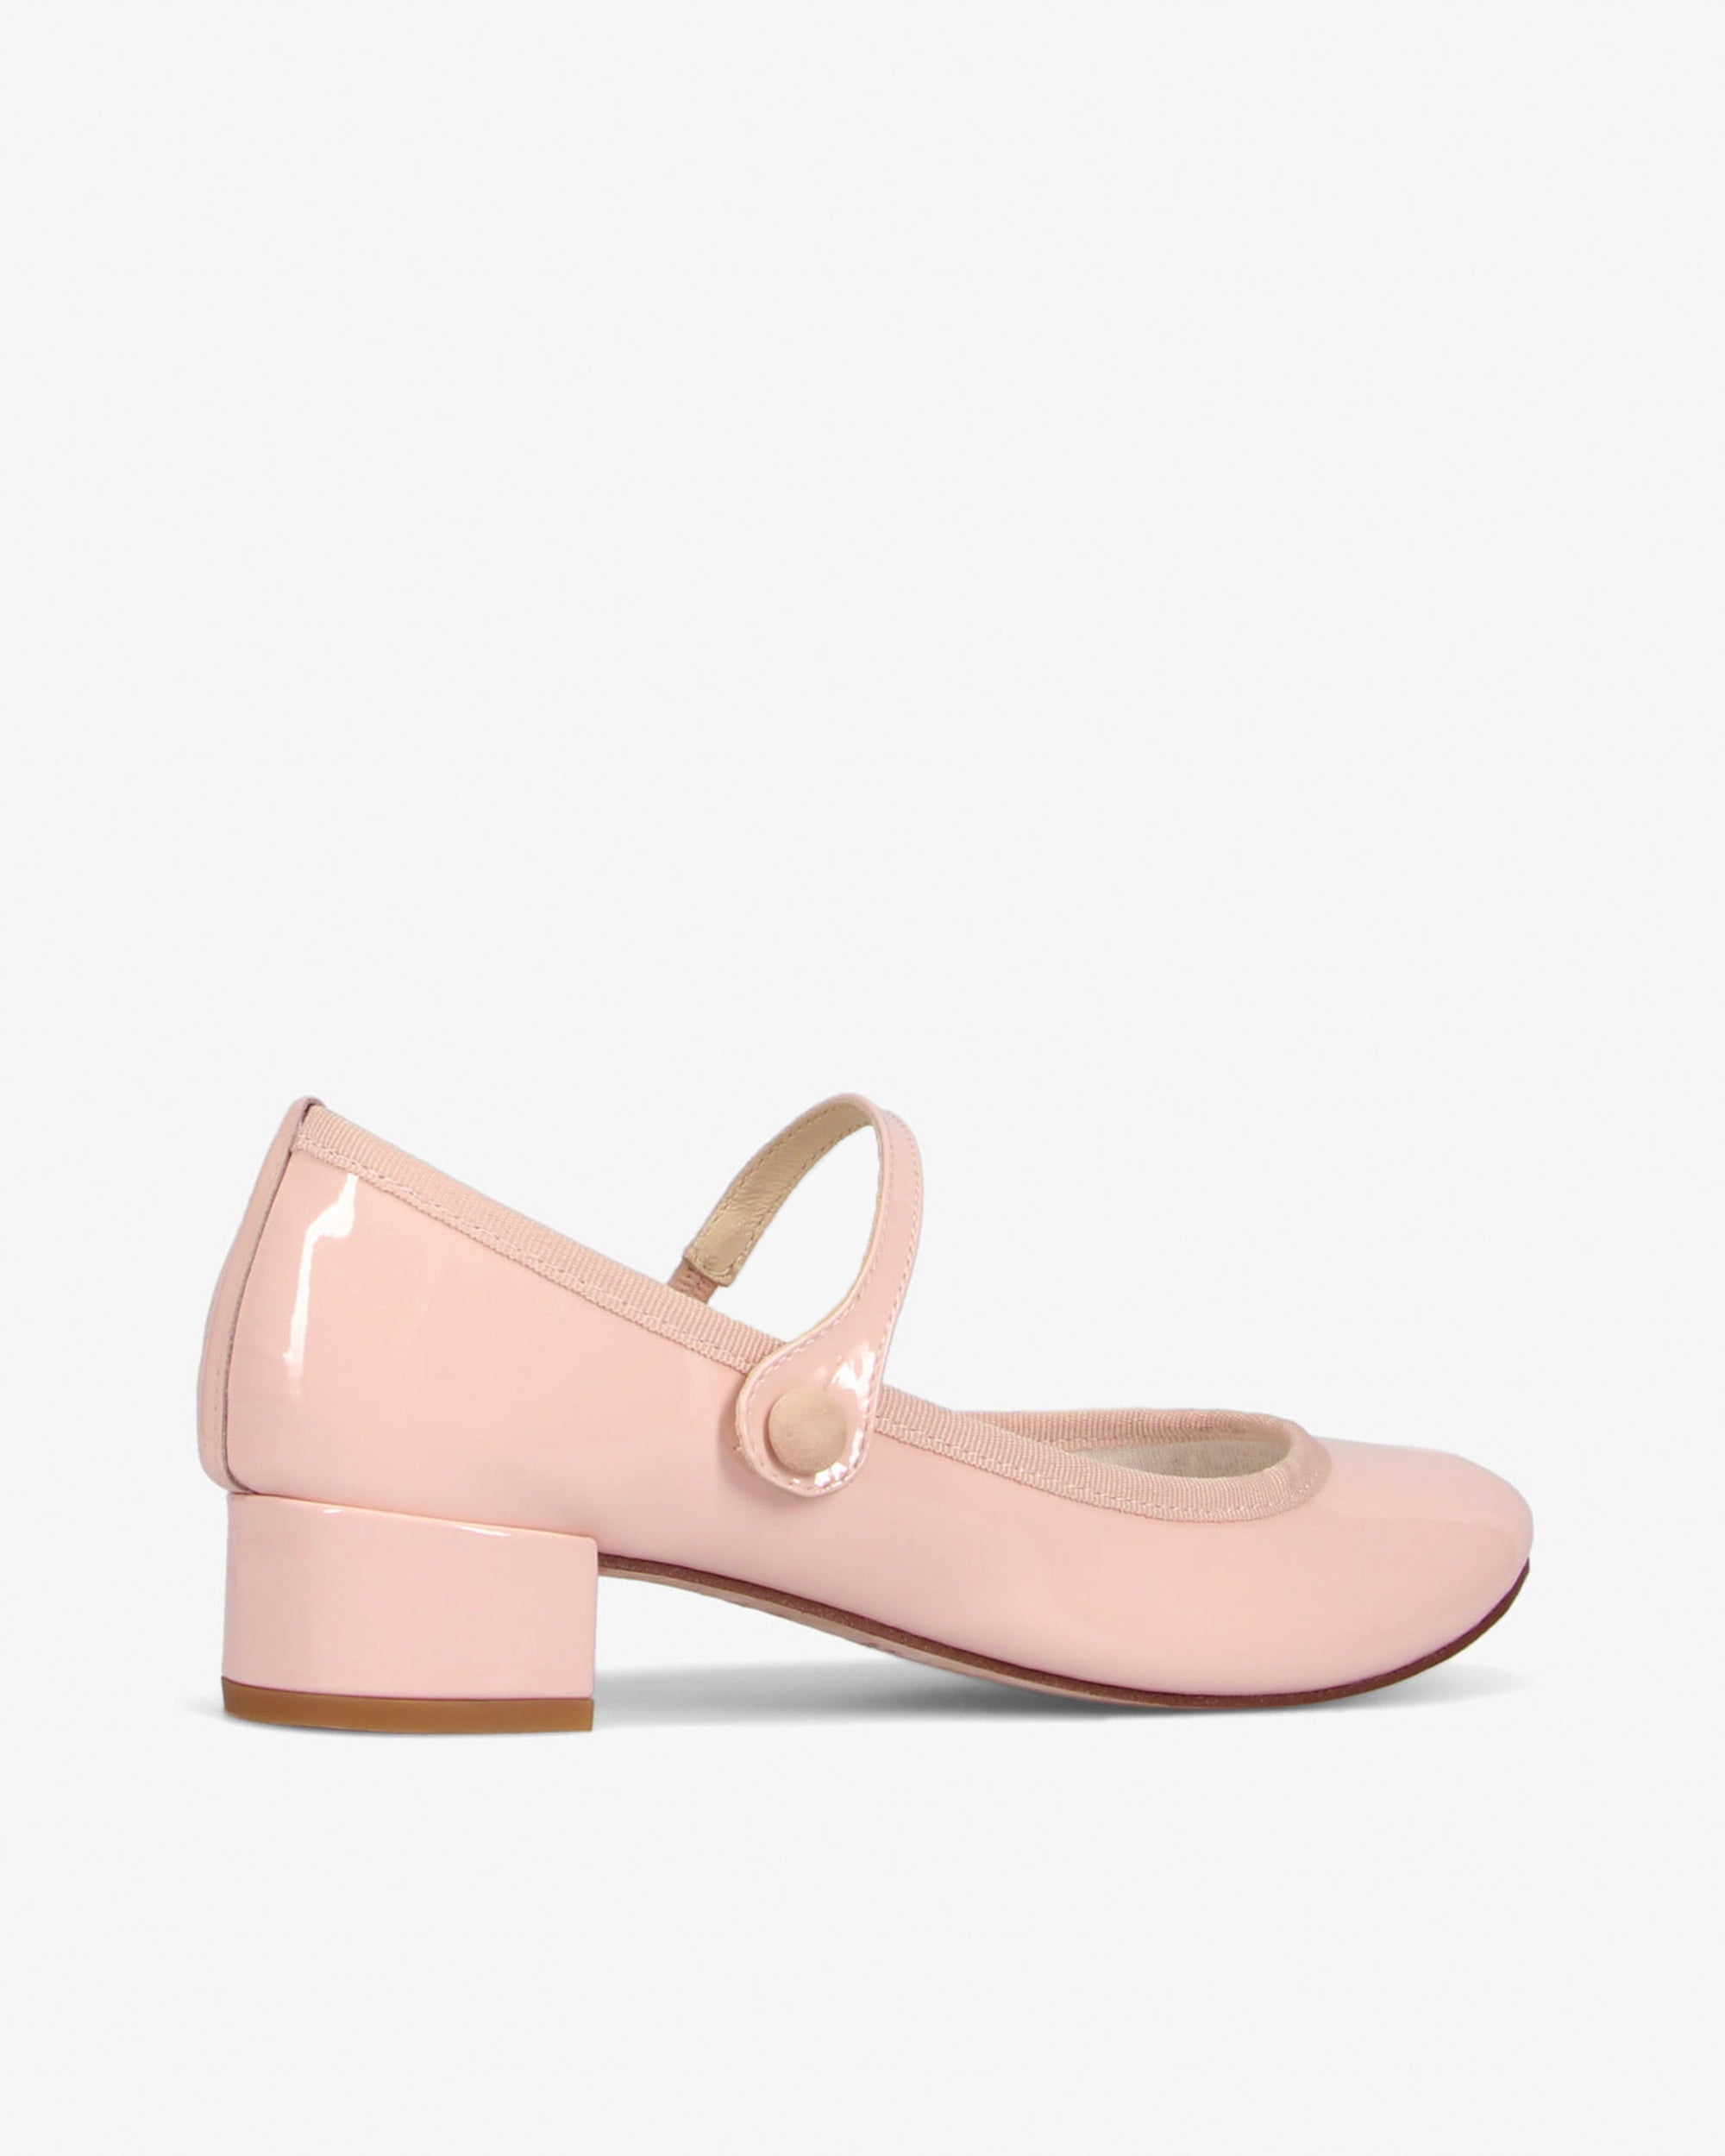 Repetto Paris | Rose mary Janes | Color Iconic pink